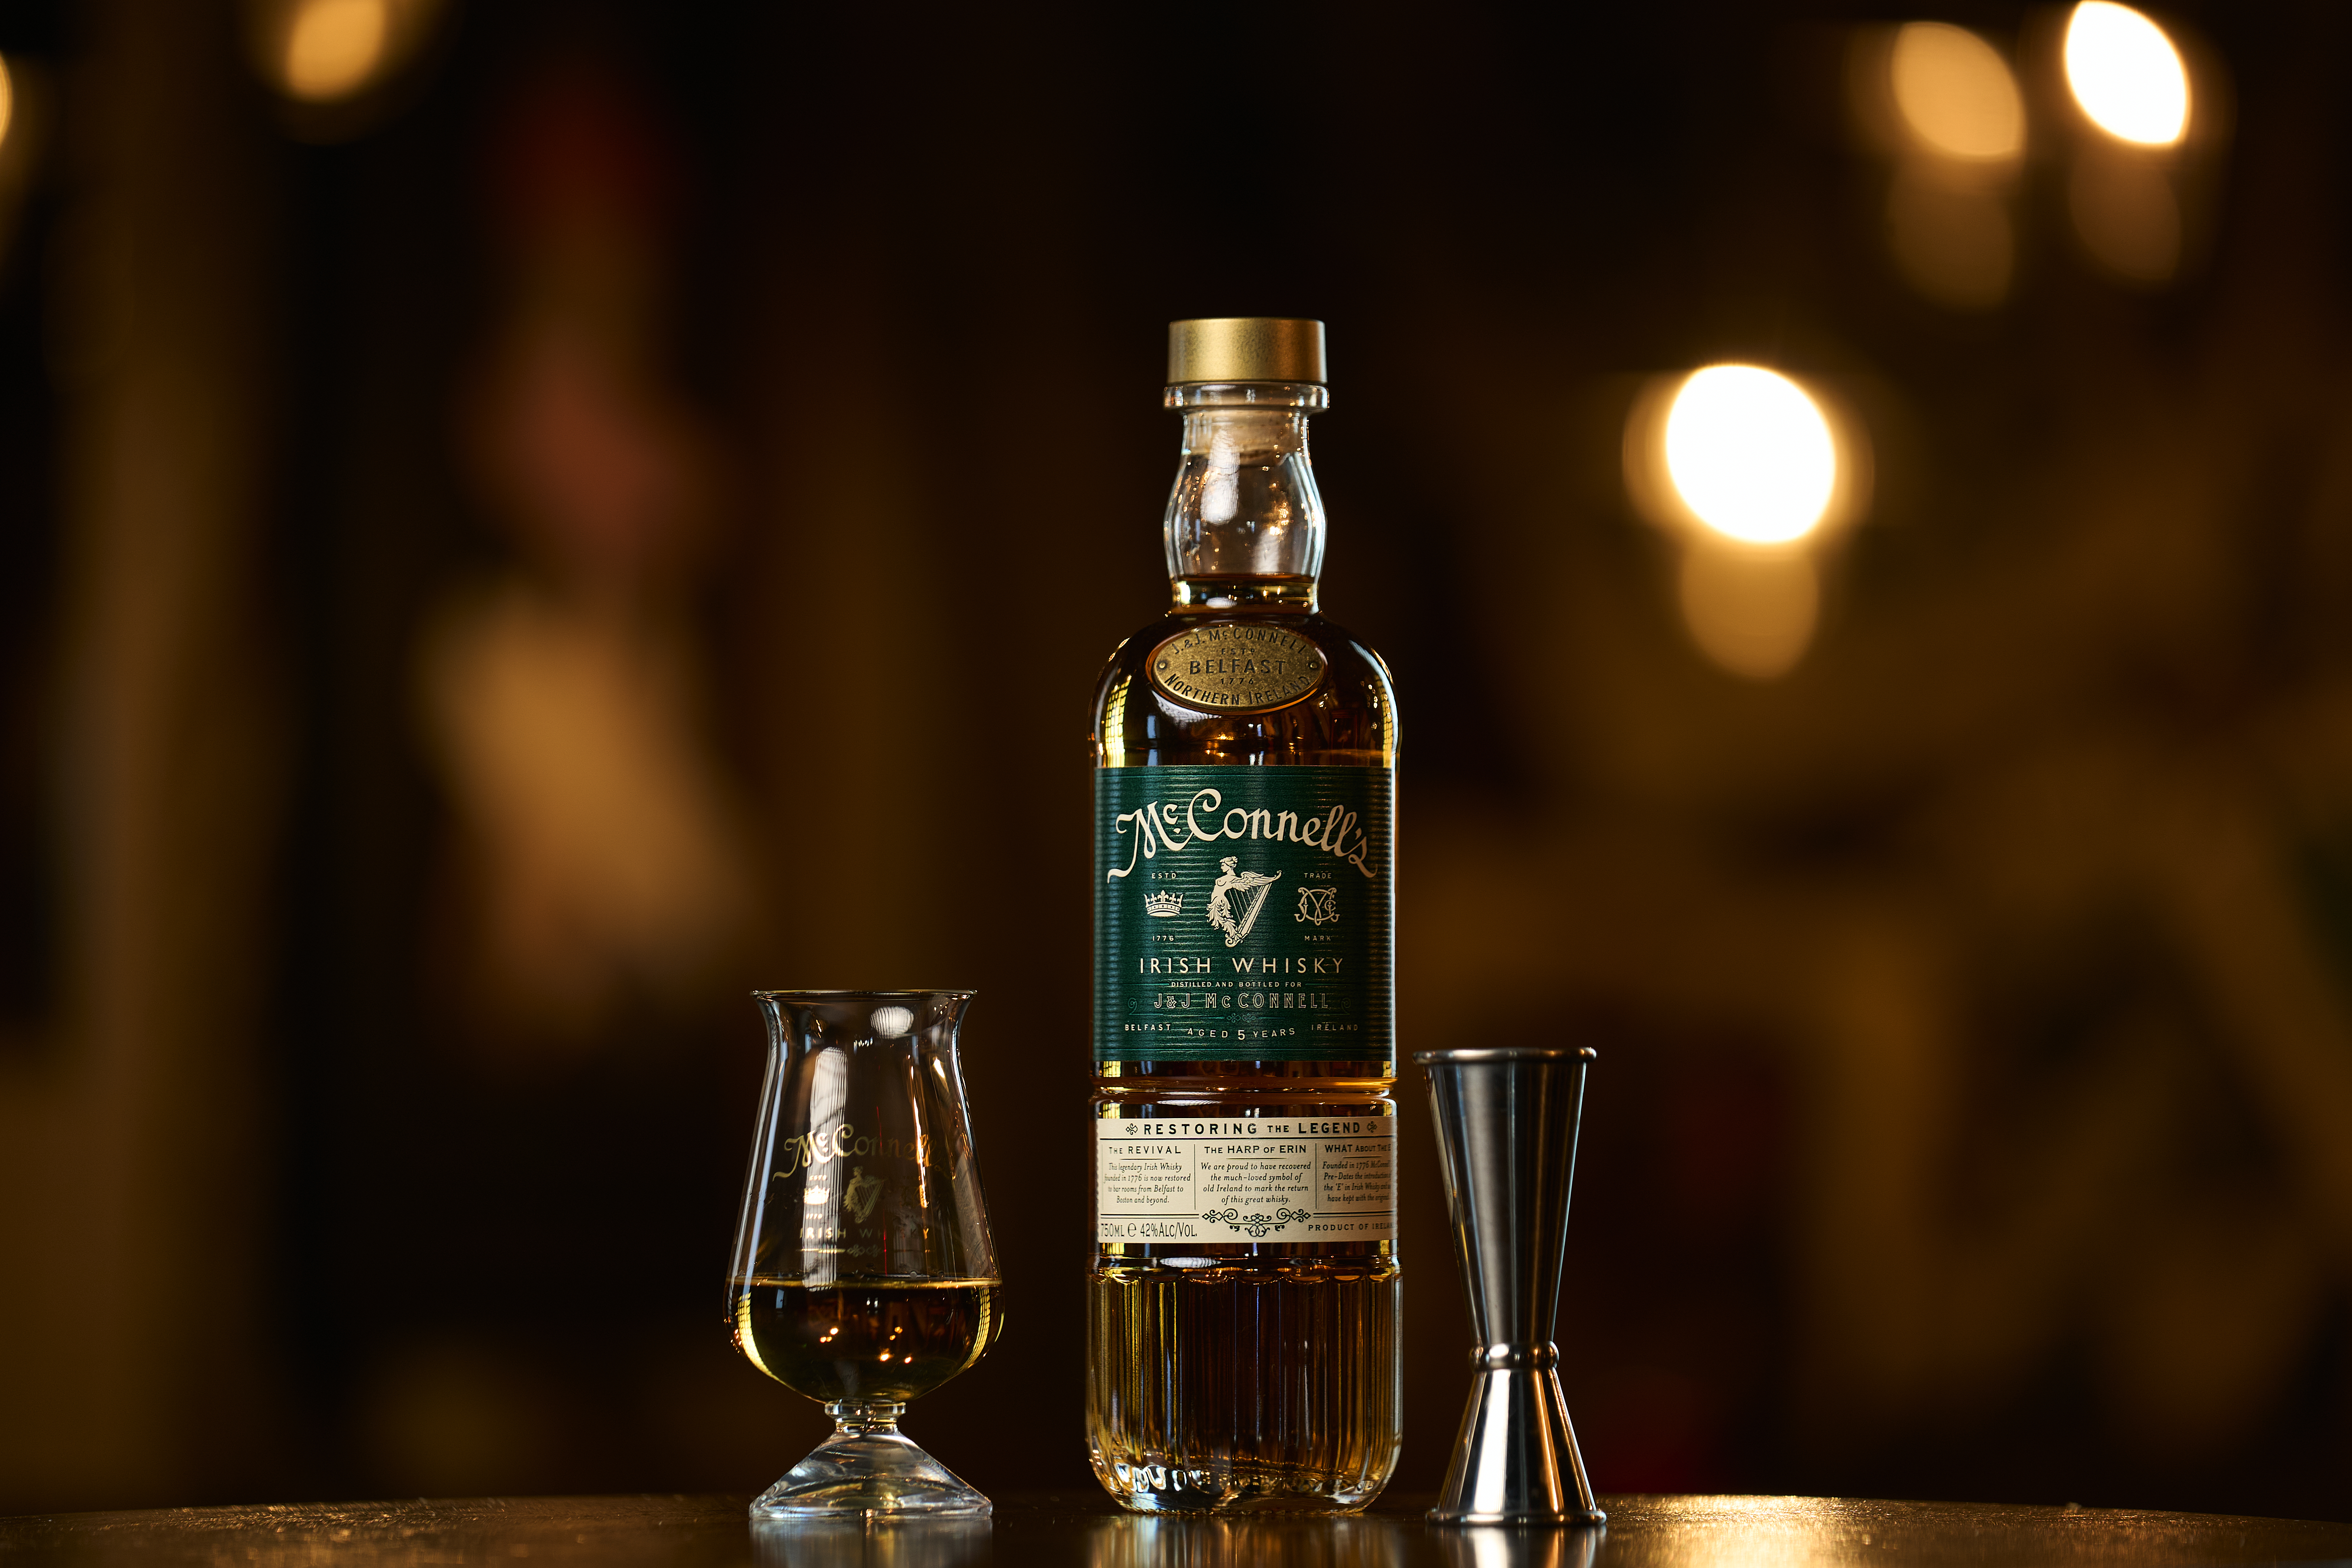 Our Top Whiskey for This St. Patrick’s Day: McConnell’s Irish Whisky